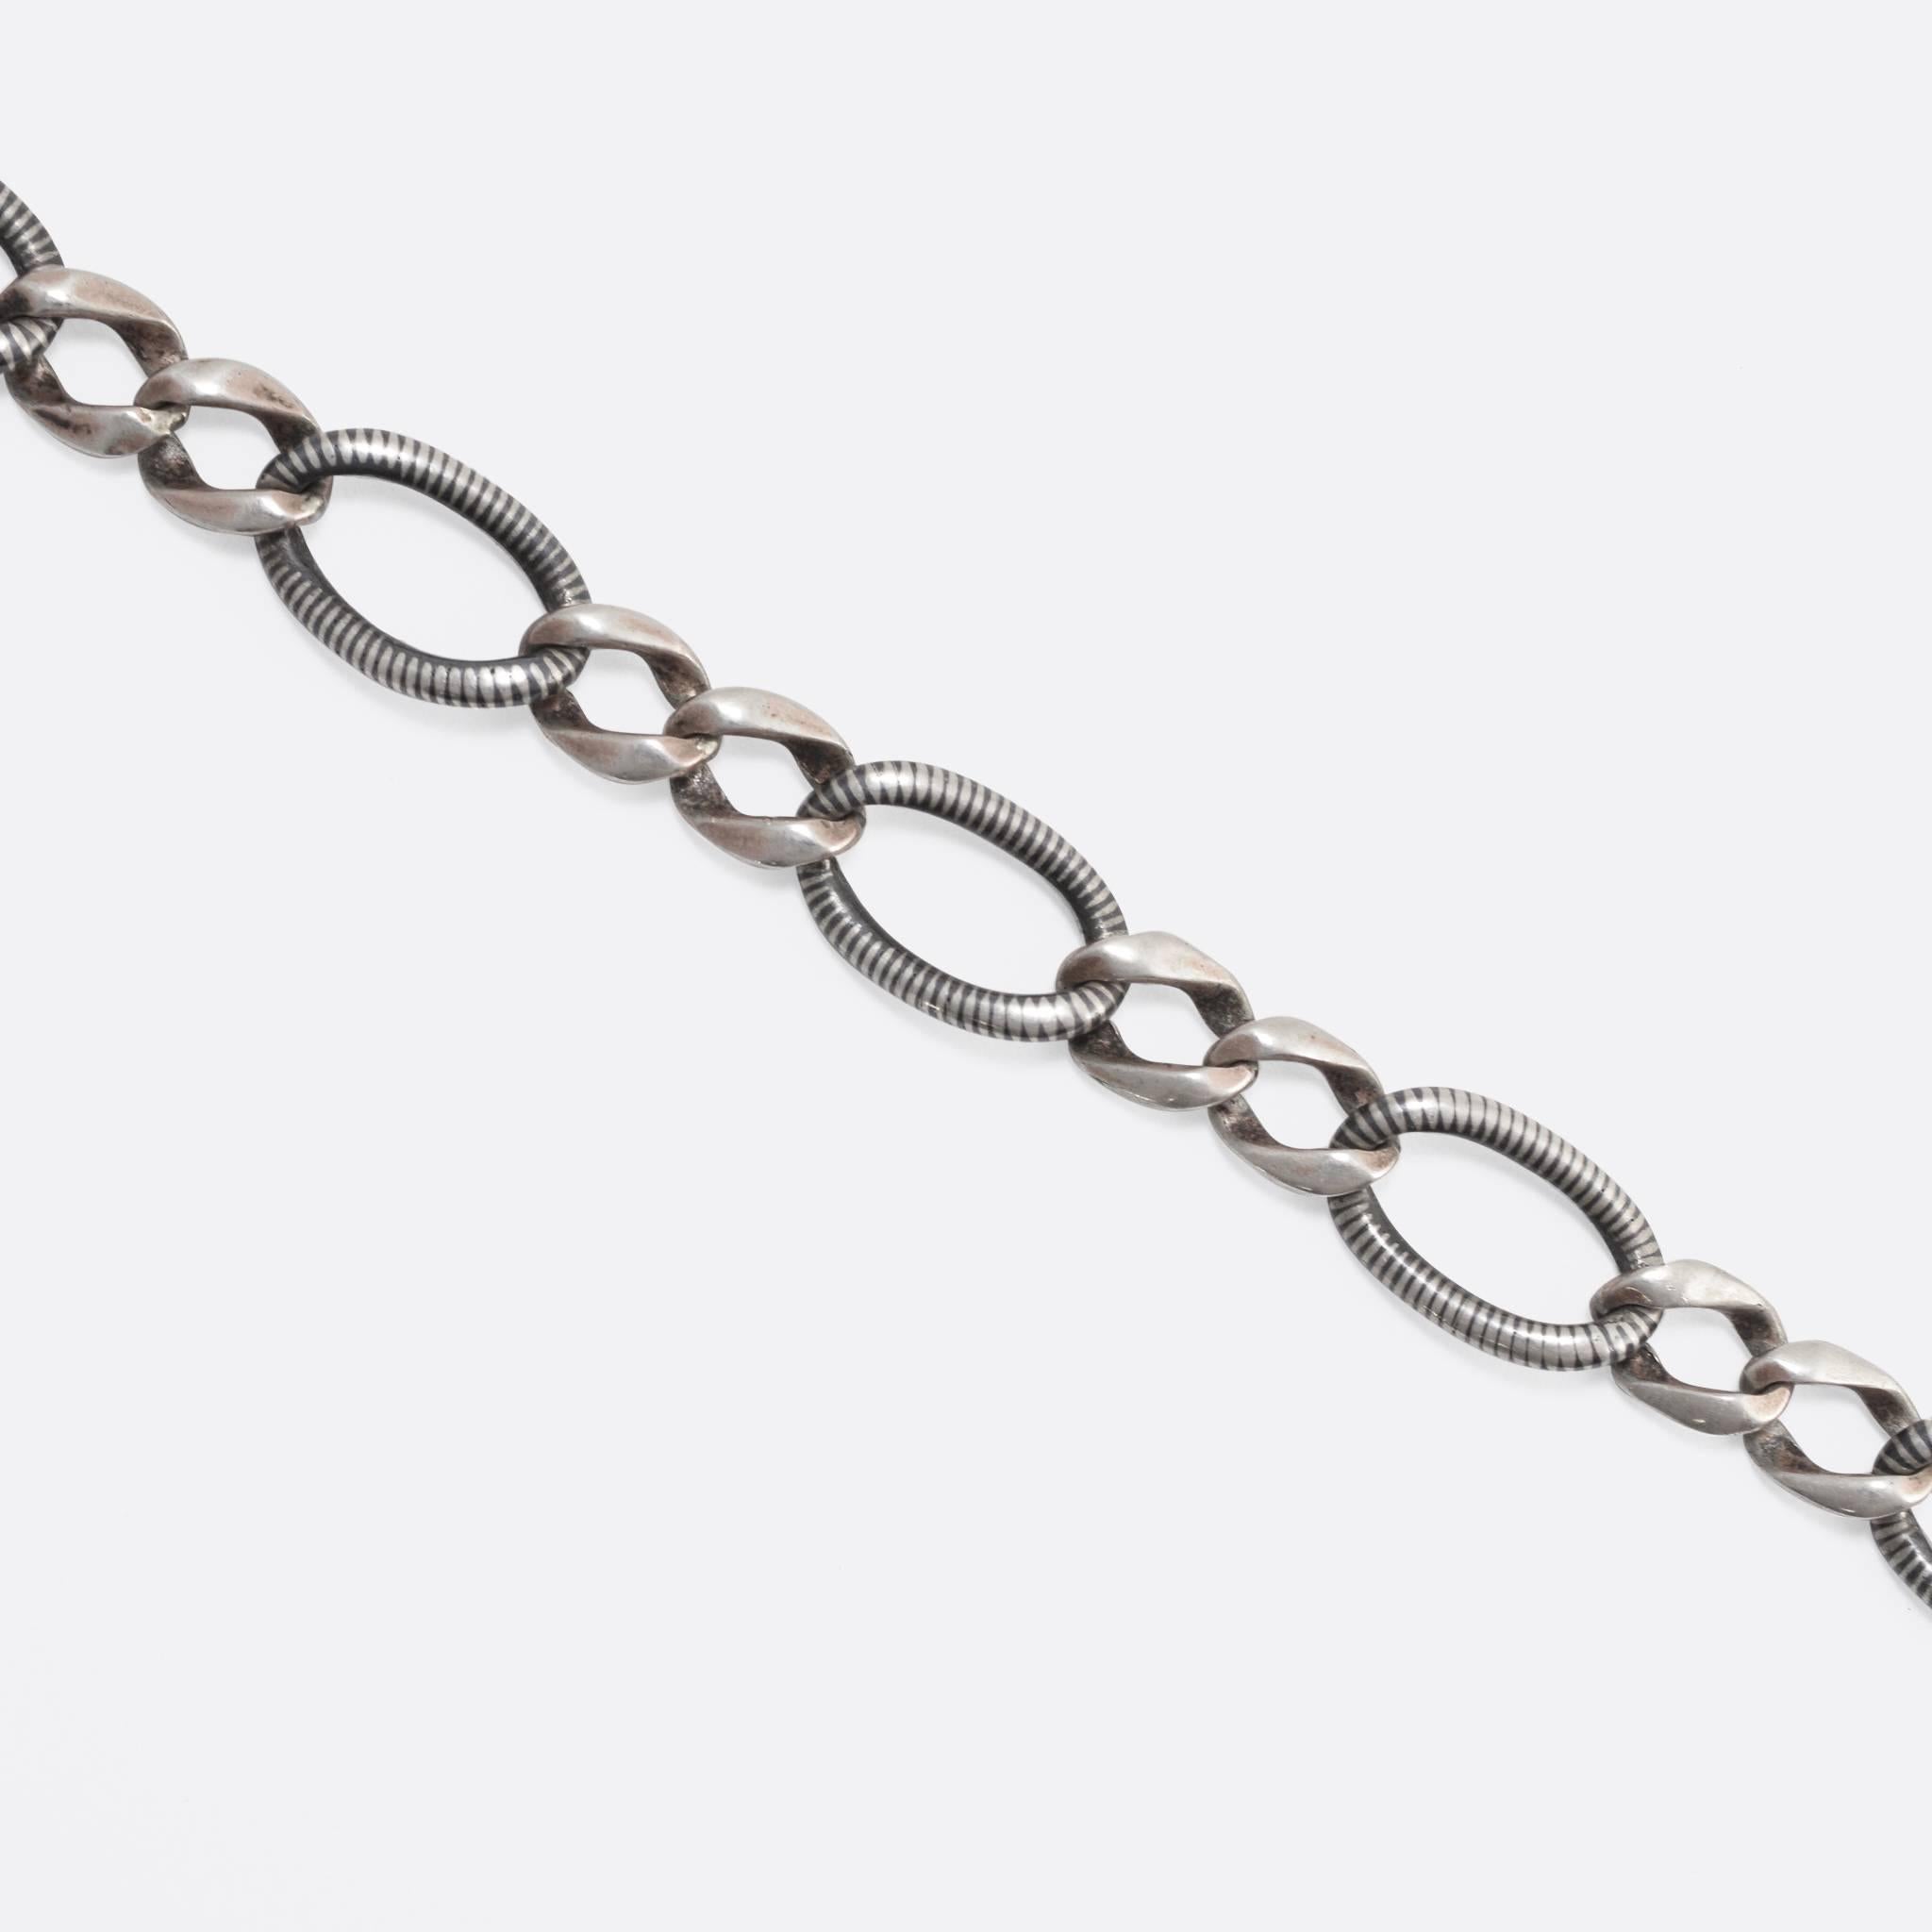 This lovely 1920s niello silver chain is likely of German origin, and features stylish curb links: the pattern is one niello link followed by two smaller silver links. Niello is a black mixture of silver, copper and lead sulphides, which in this